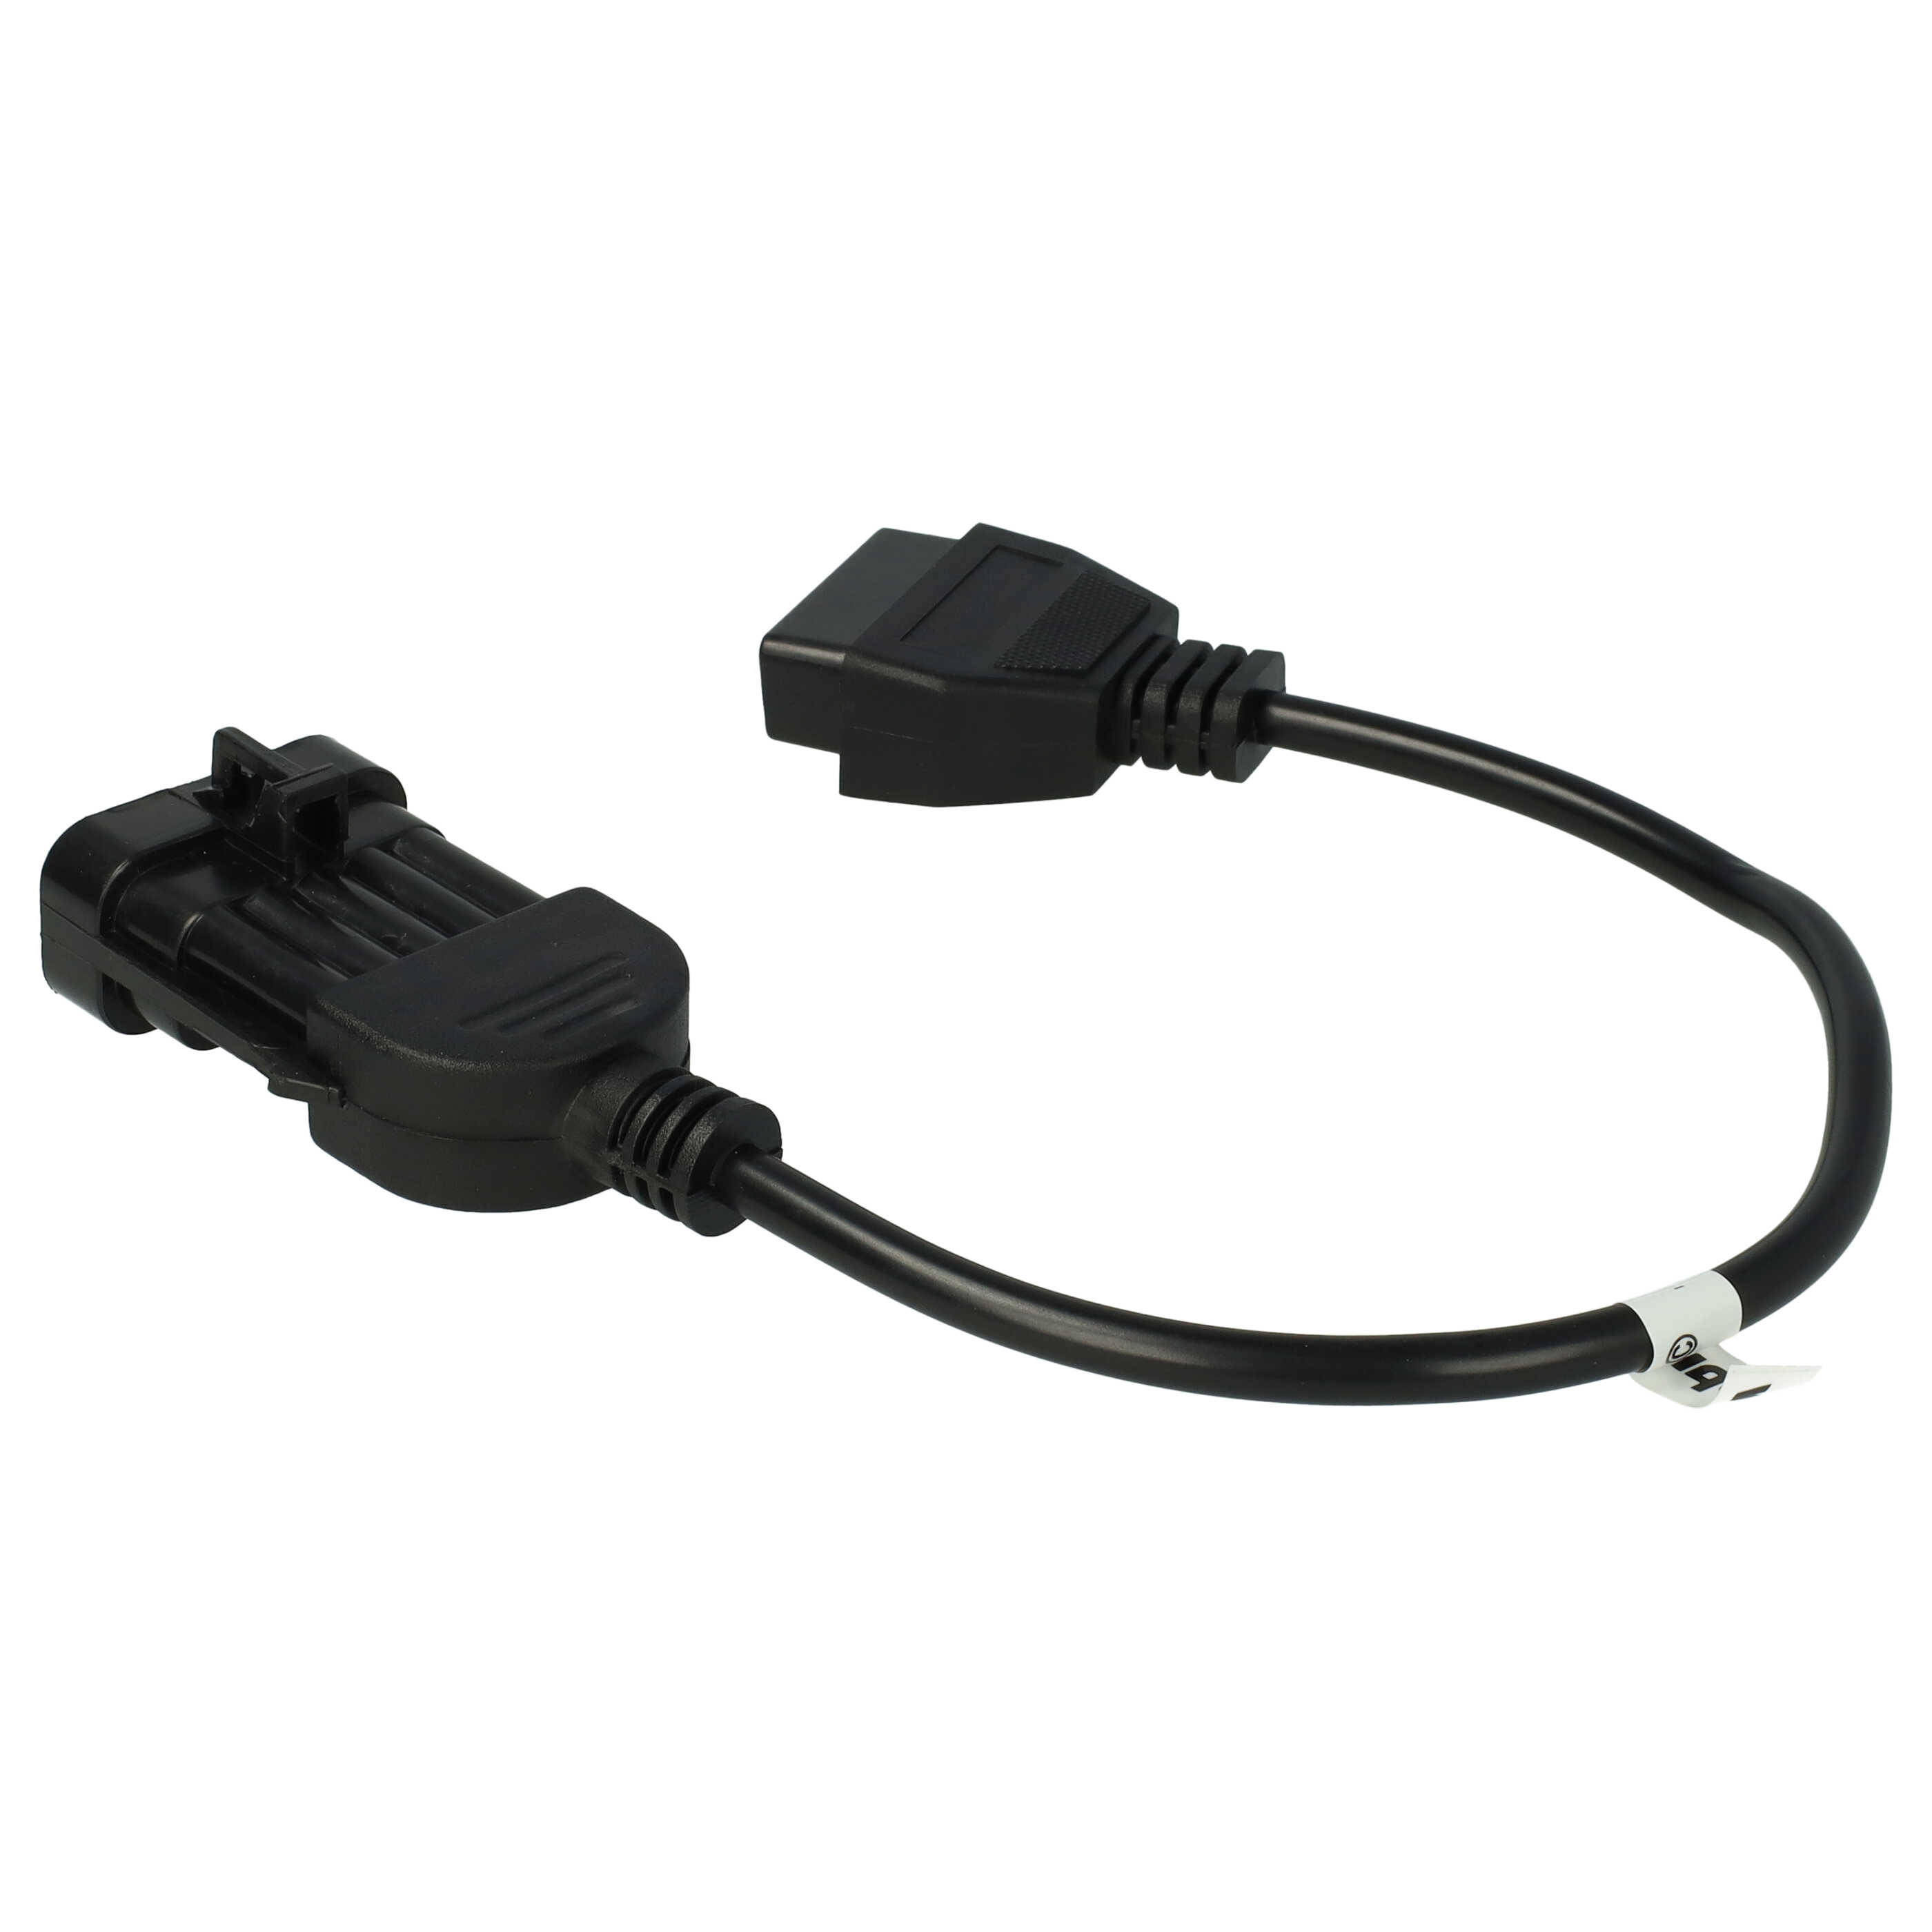 vhbw OBD2 Adapter 10Pin OBD1 to OBD2 suitable for Opel -Bj 1997 Astra Vehicle - 30 cm